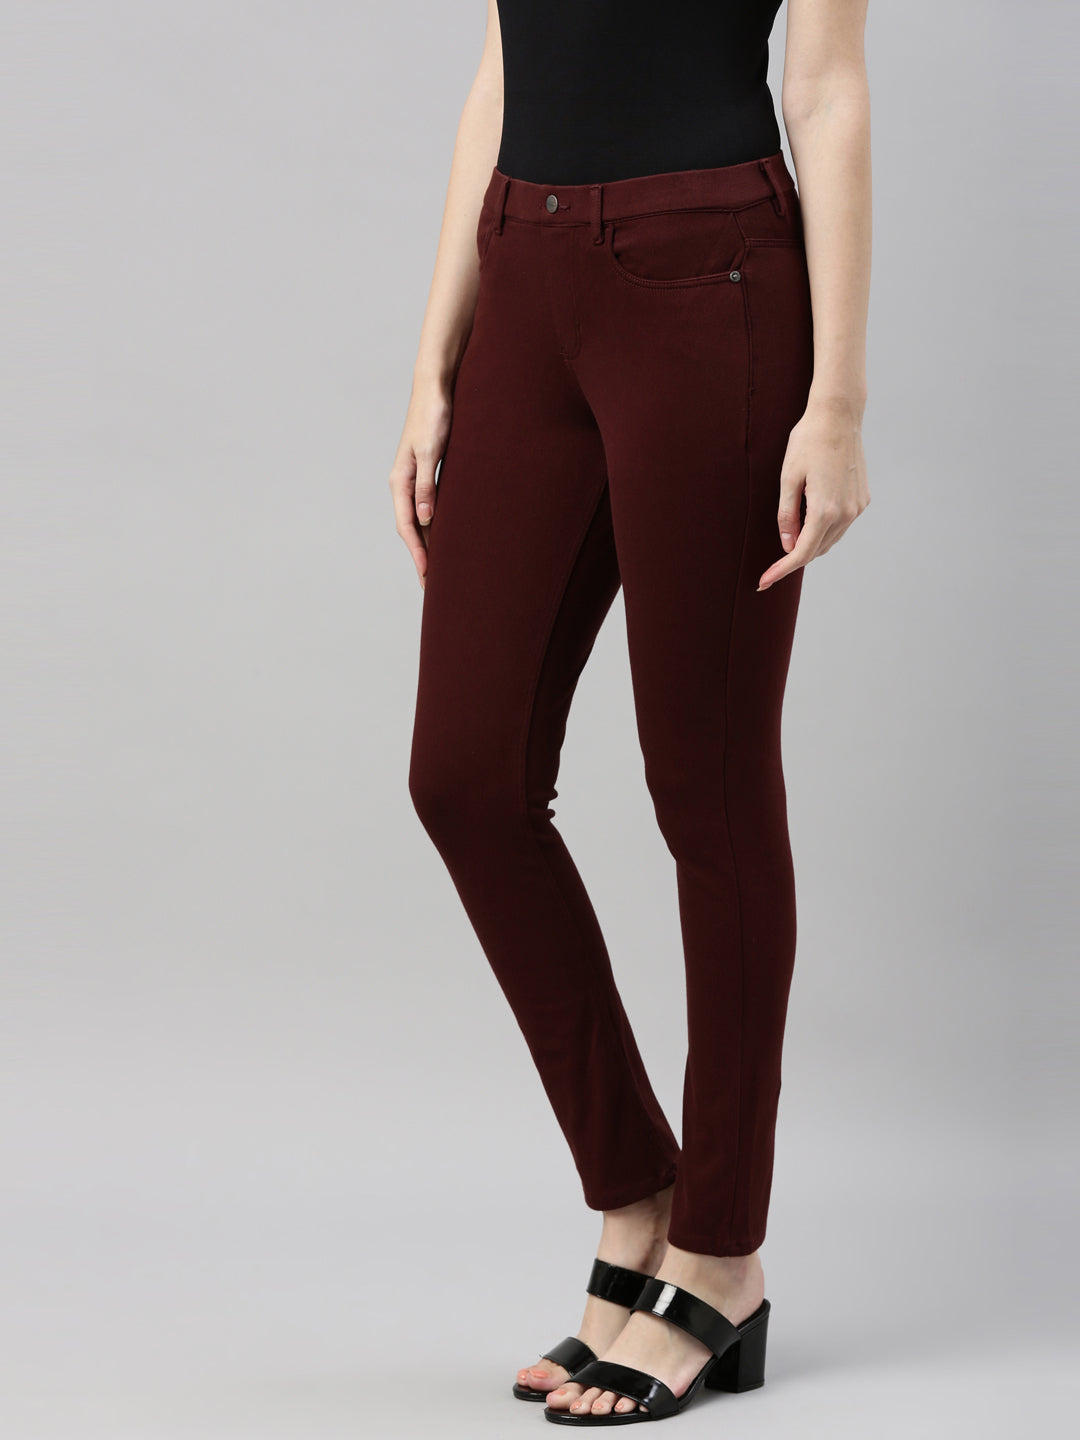 Women Solid Maroon Super Stretch Jeggings